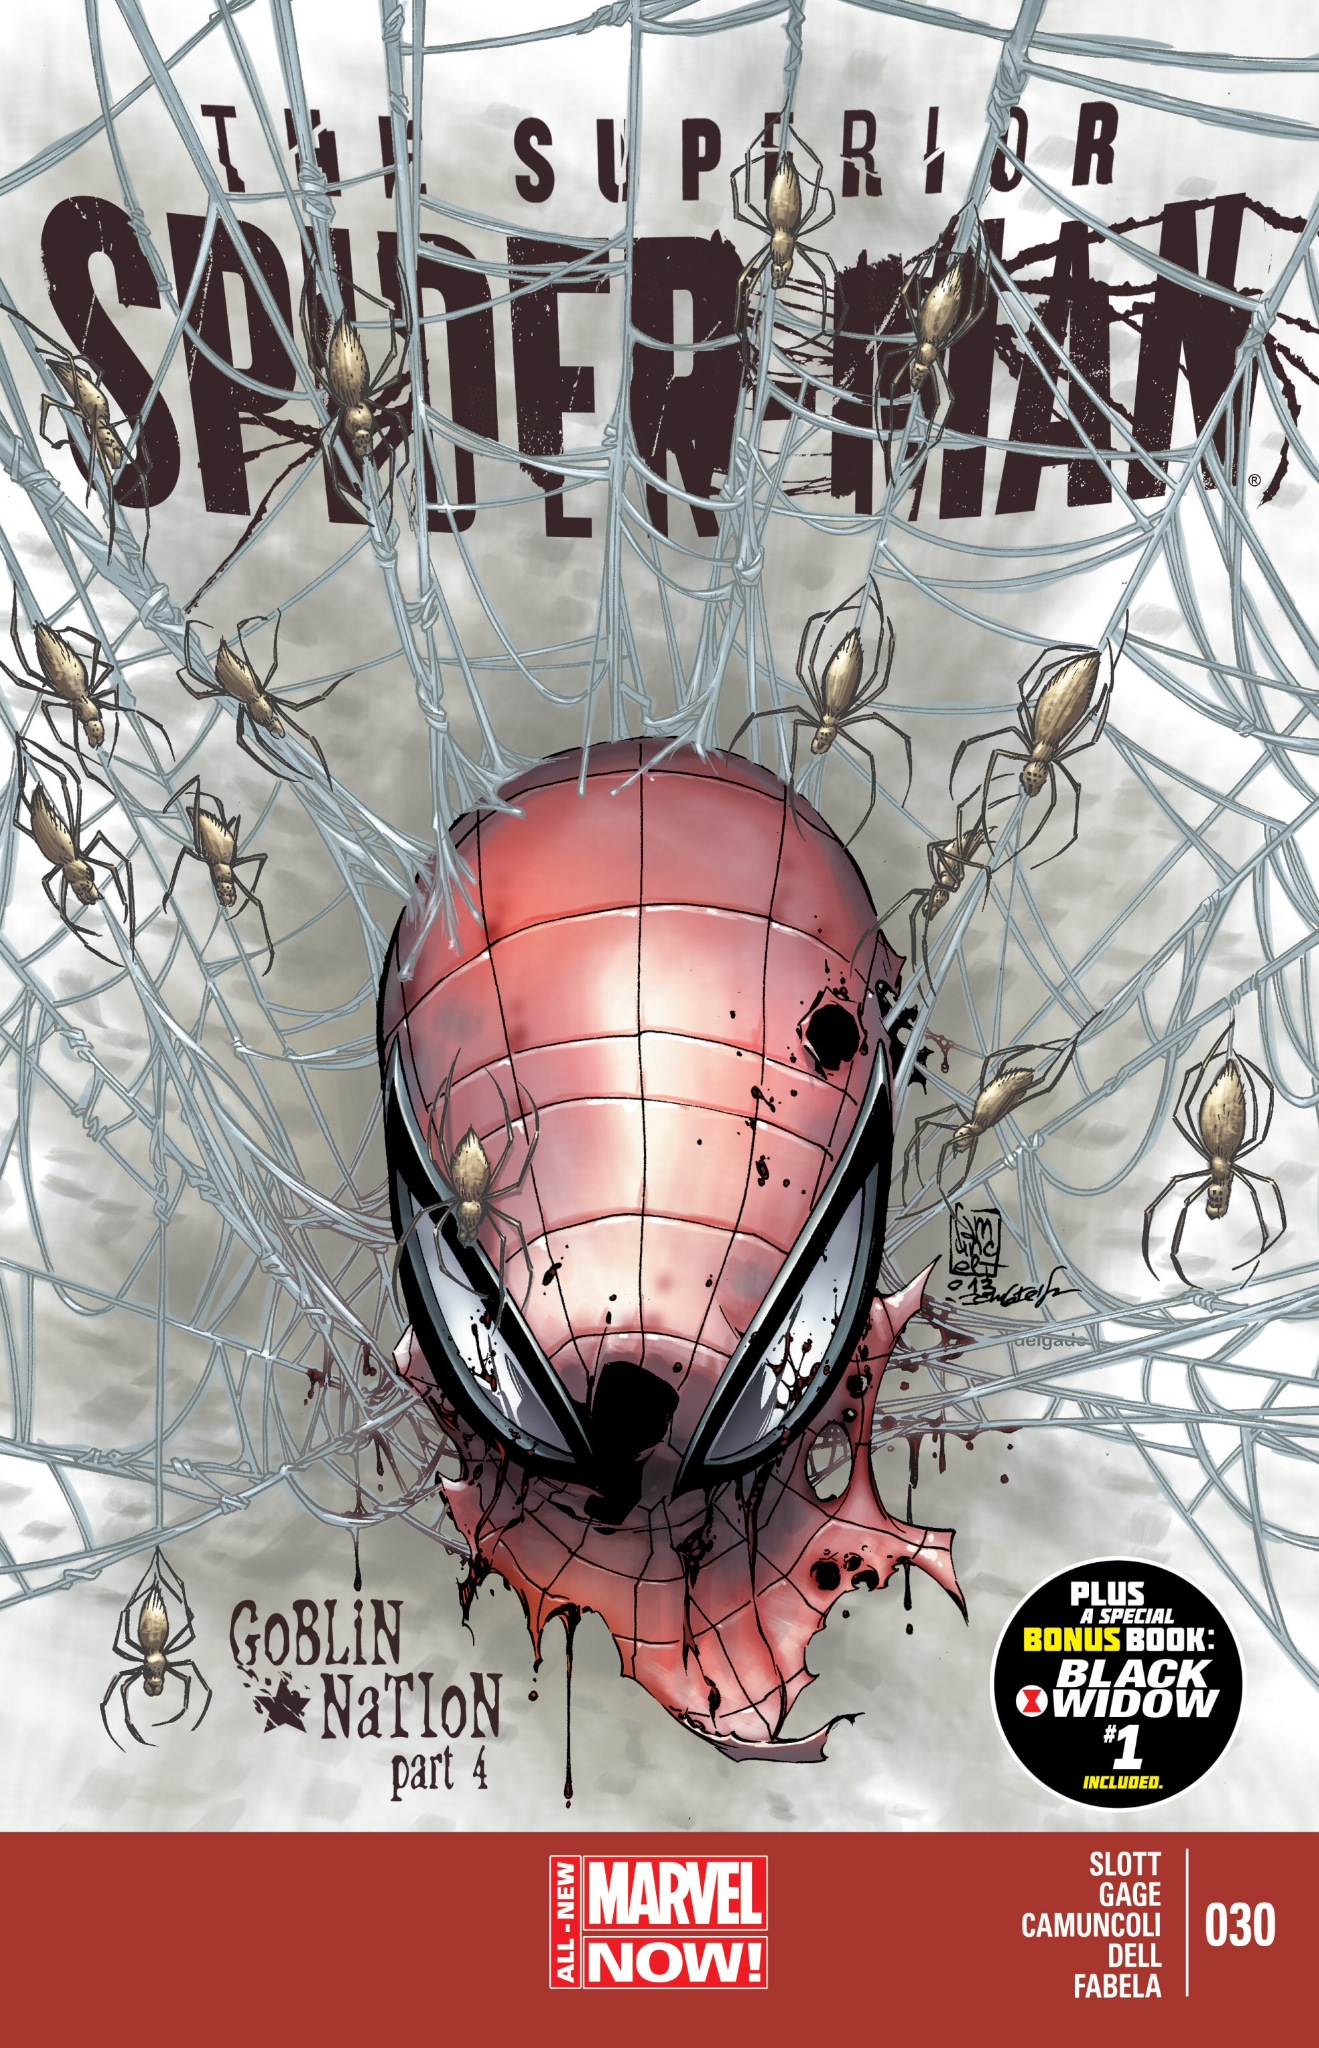 Superior Spider-Man #30: A Logical Turn of Events